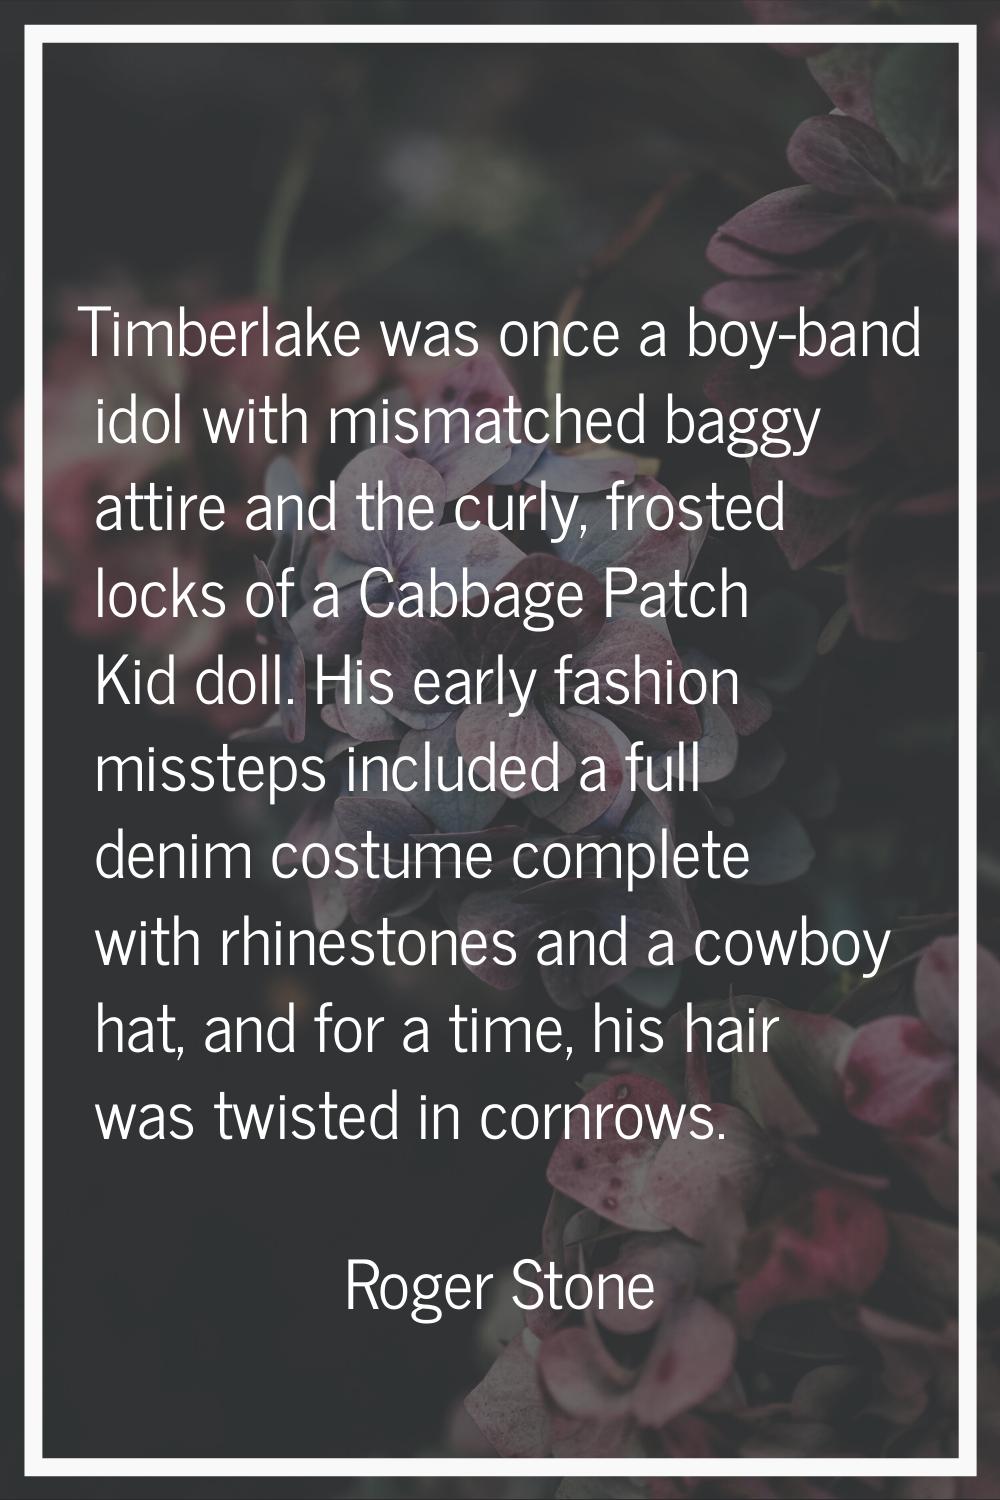 Timberlake was once a boy-band idol with mismatched baggy attire and the curly, frosted locks of a 